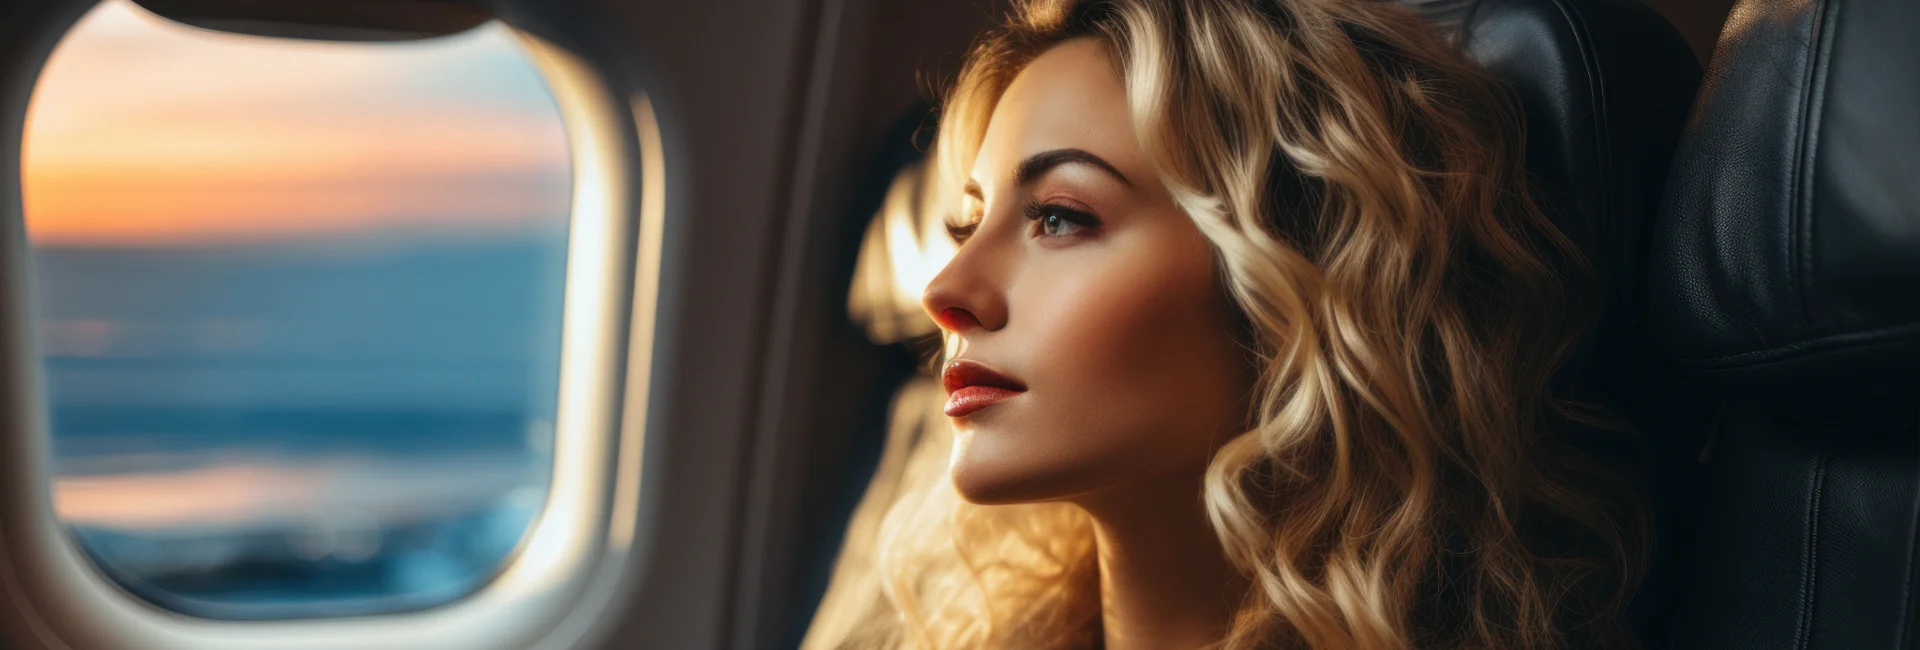 beautiful woman loooking out airplane window